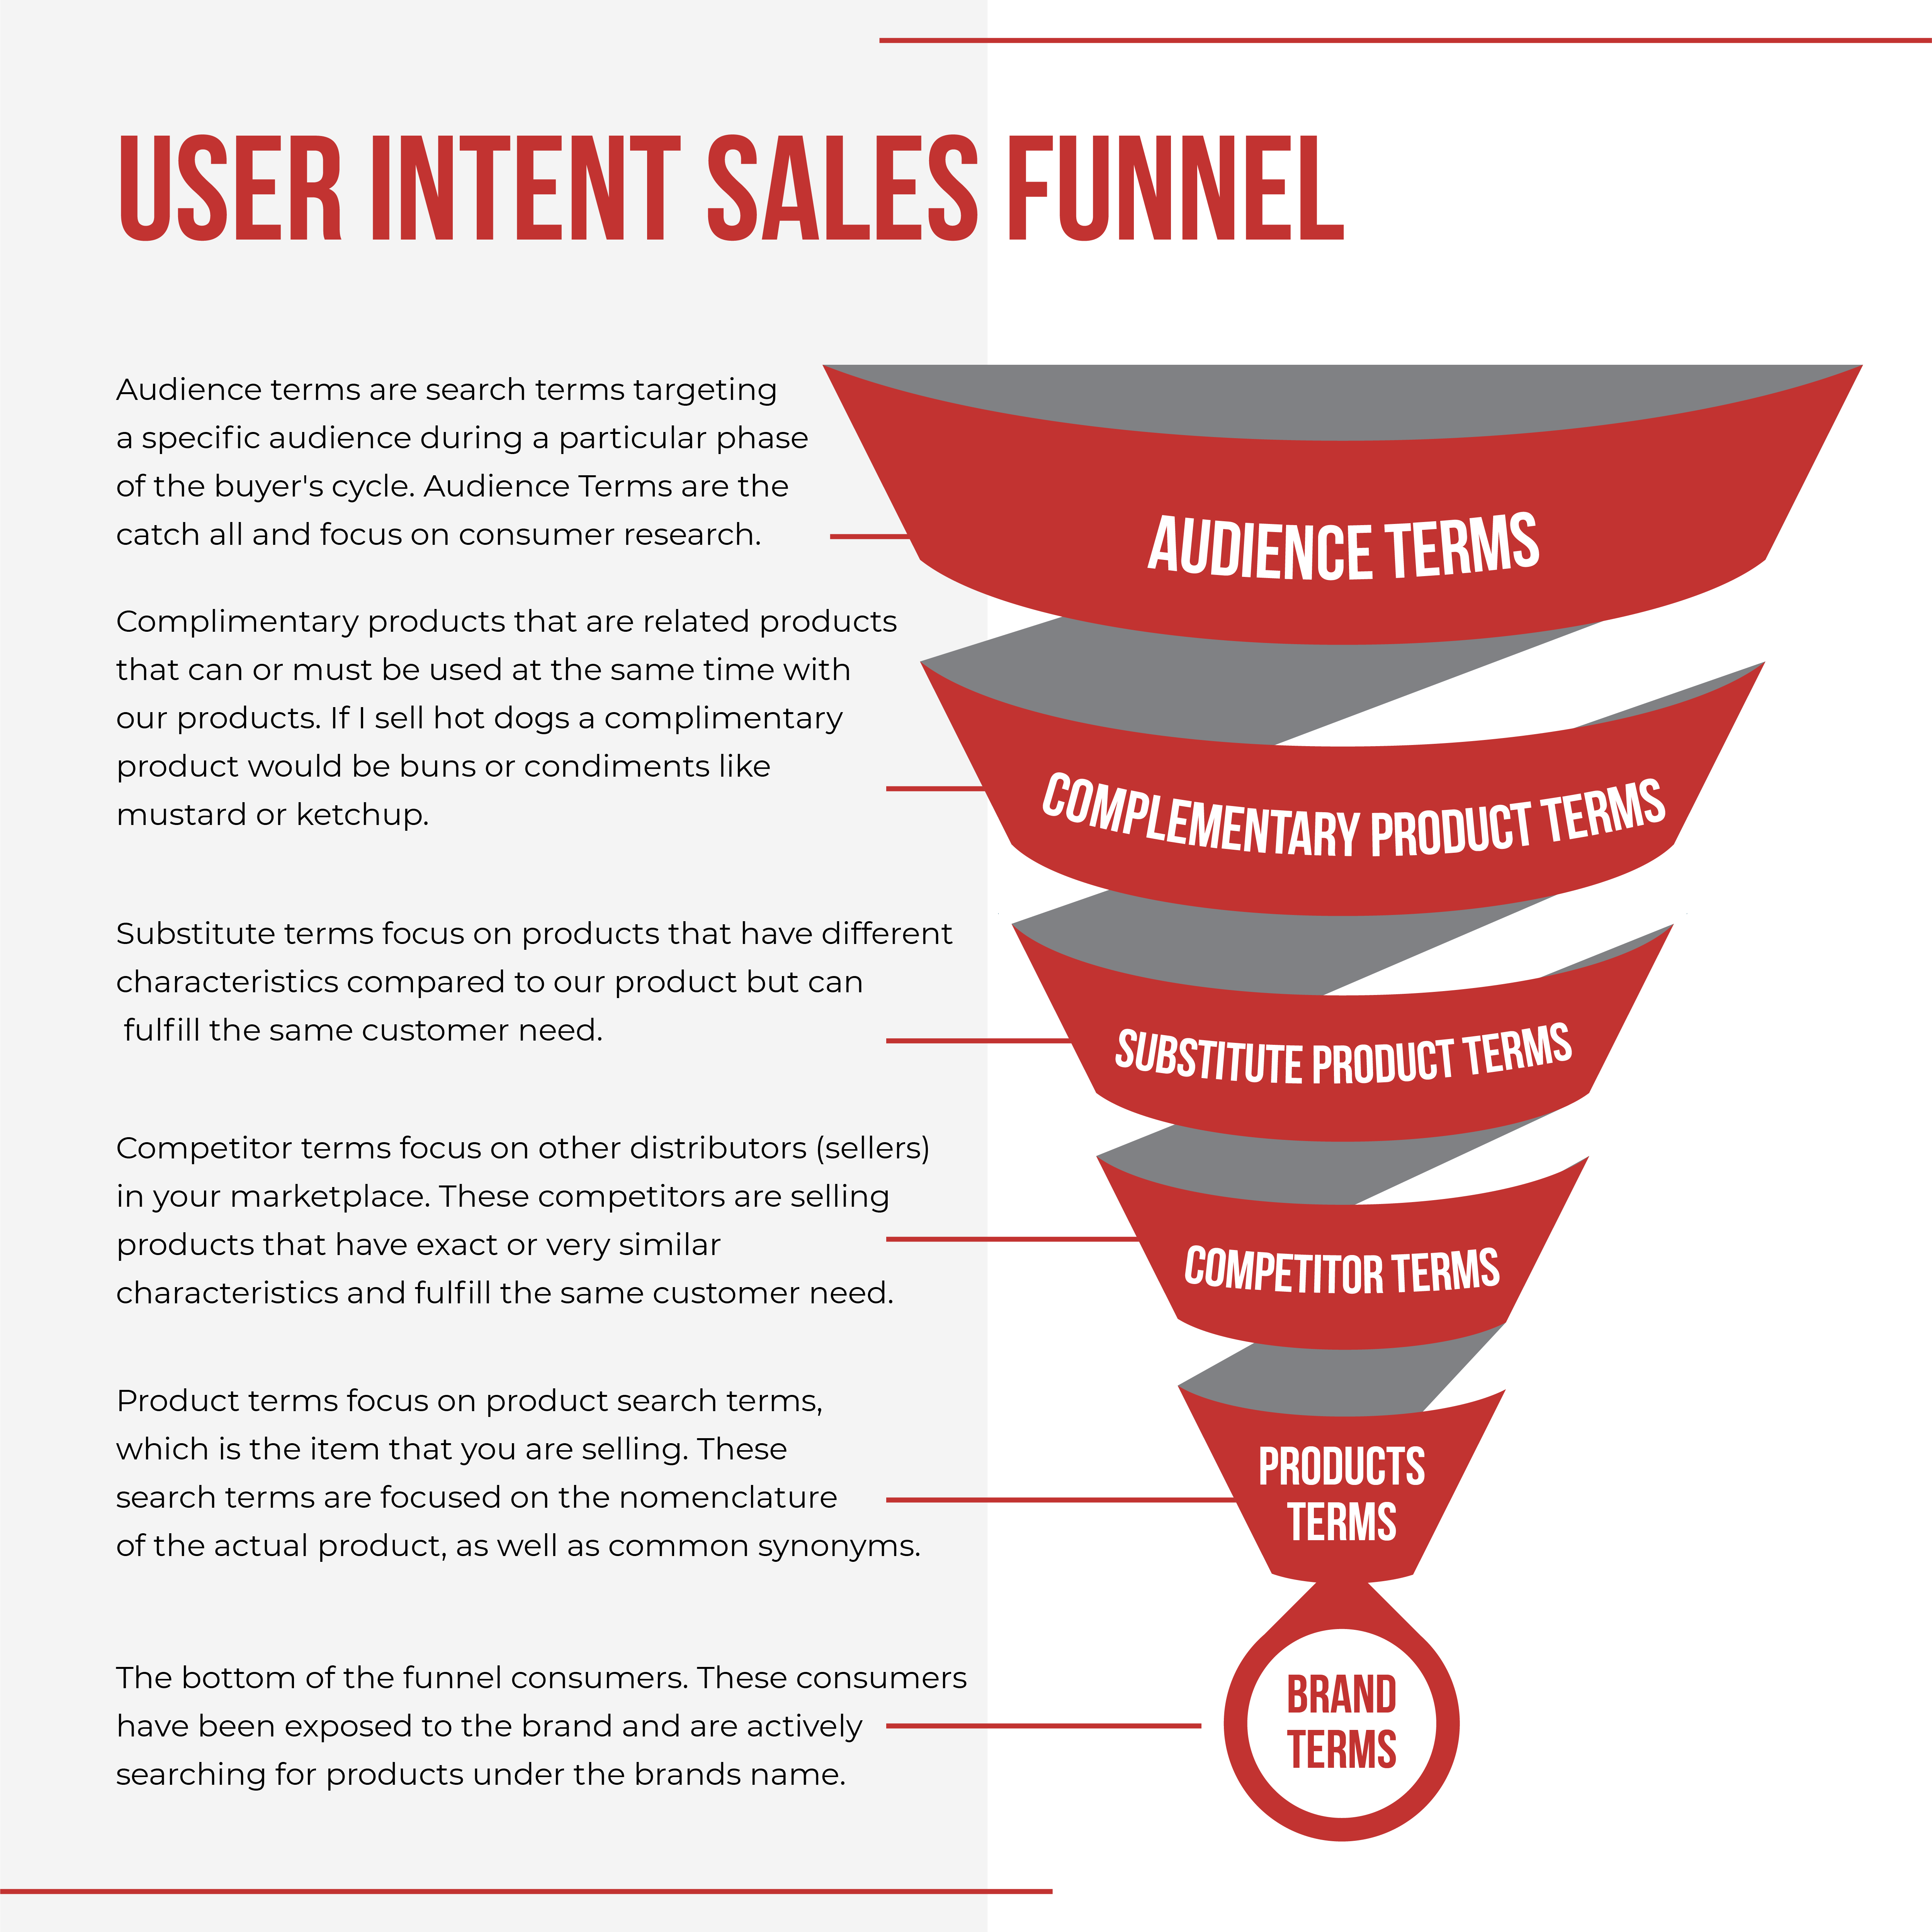 User Intent Funnel infographic